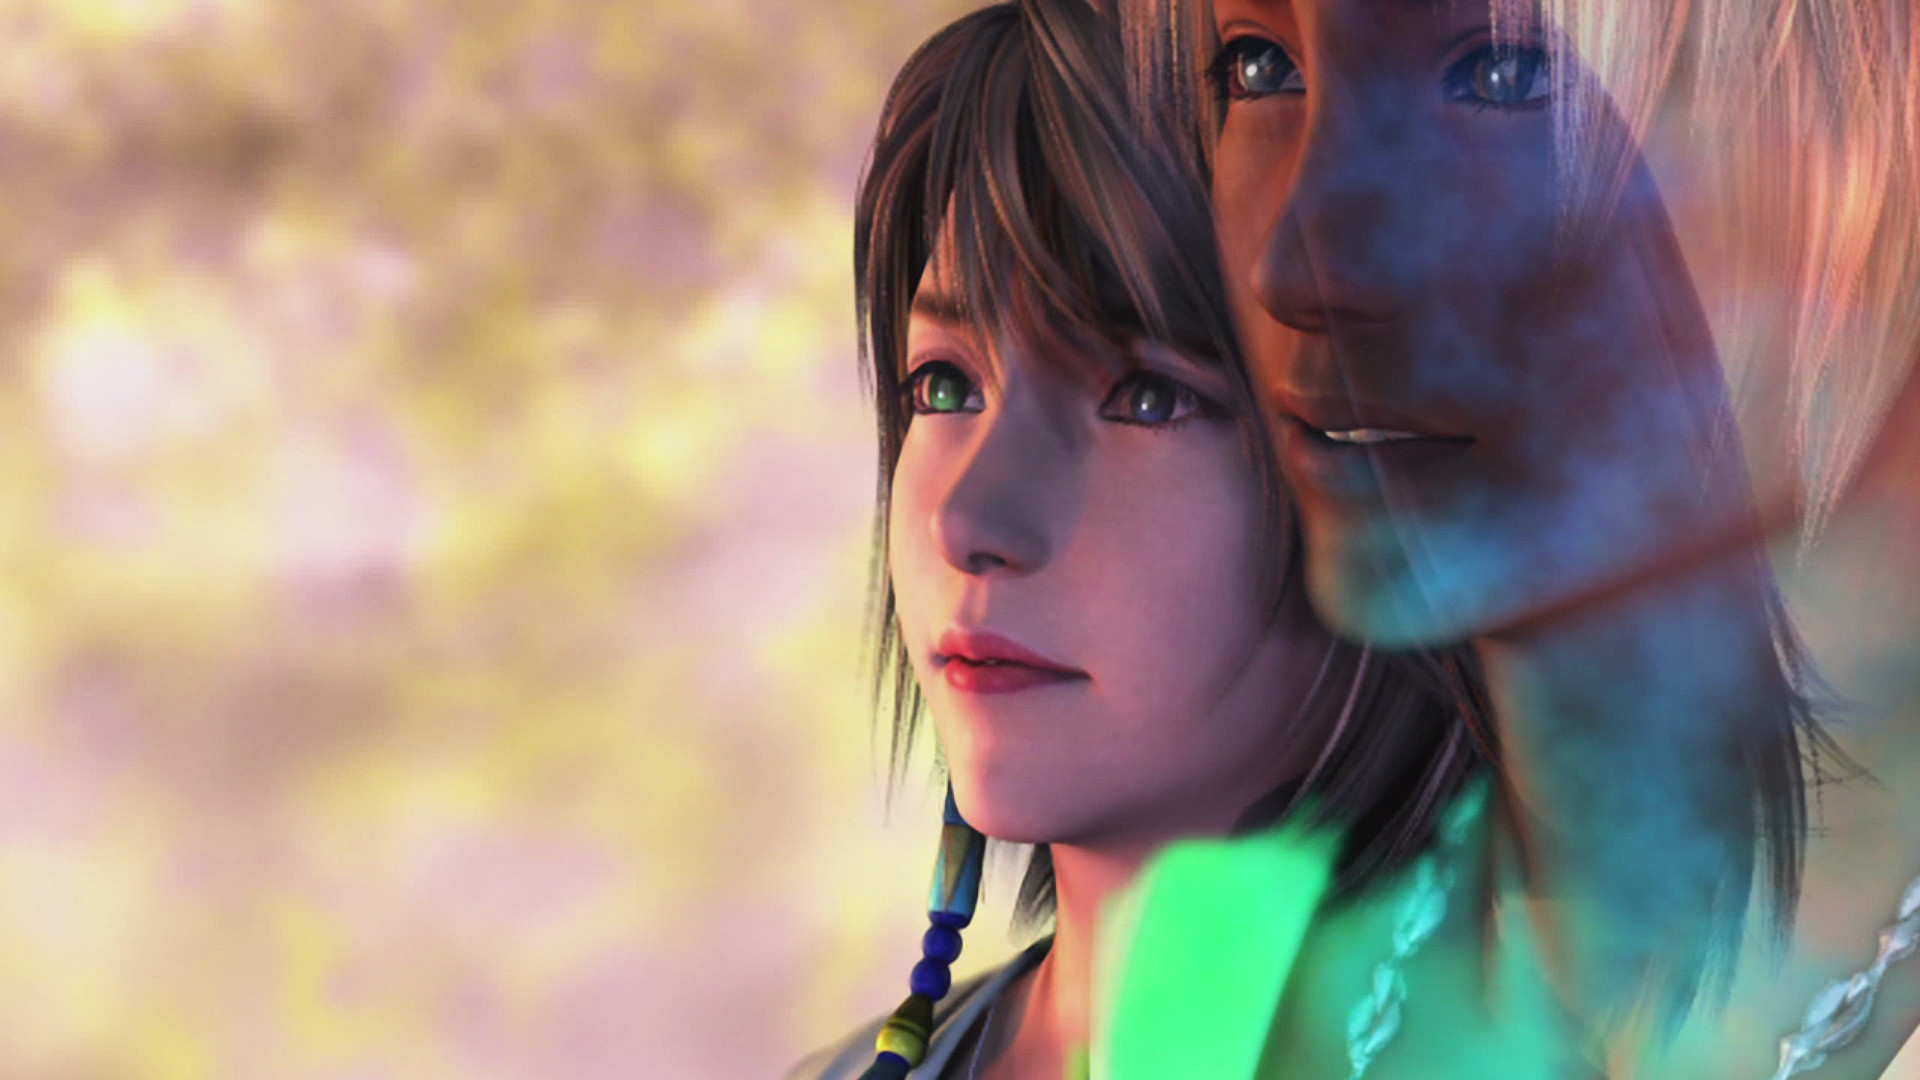 1920x1080 Final Fantasy X: an ode to Tidus and Yuna - Final Fantasy X - Giant Bomb